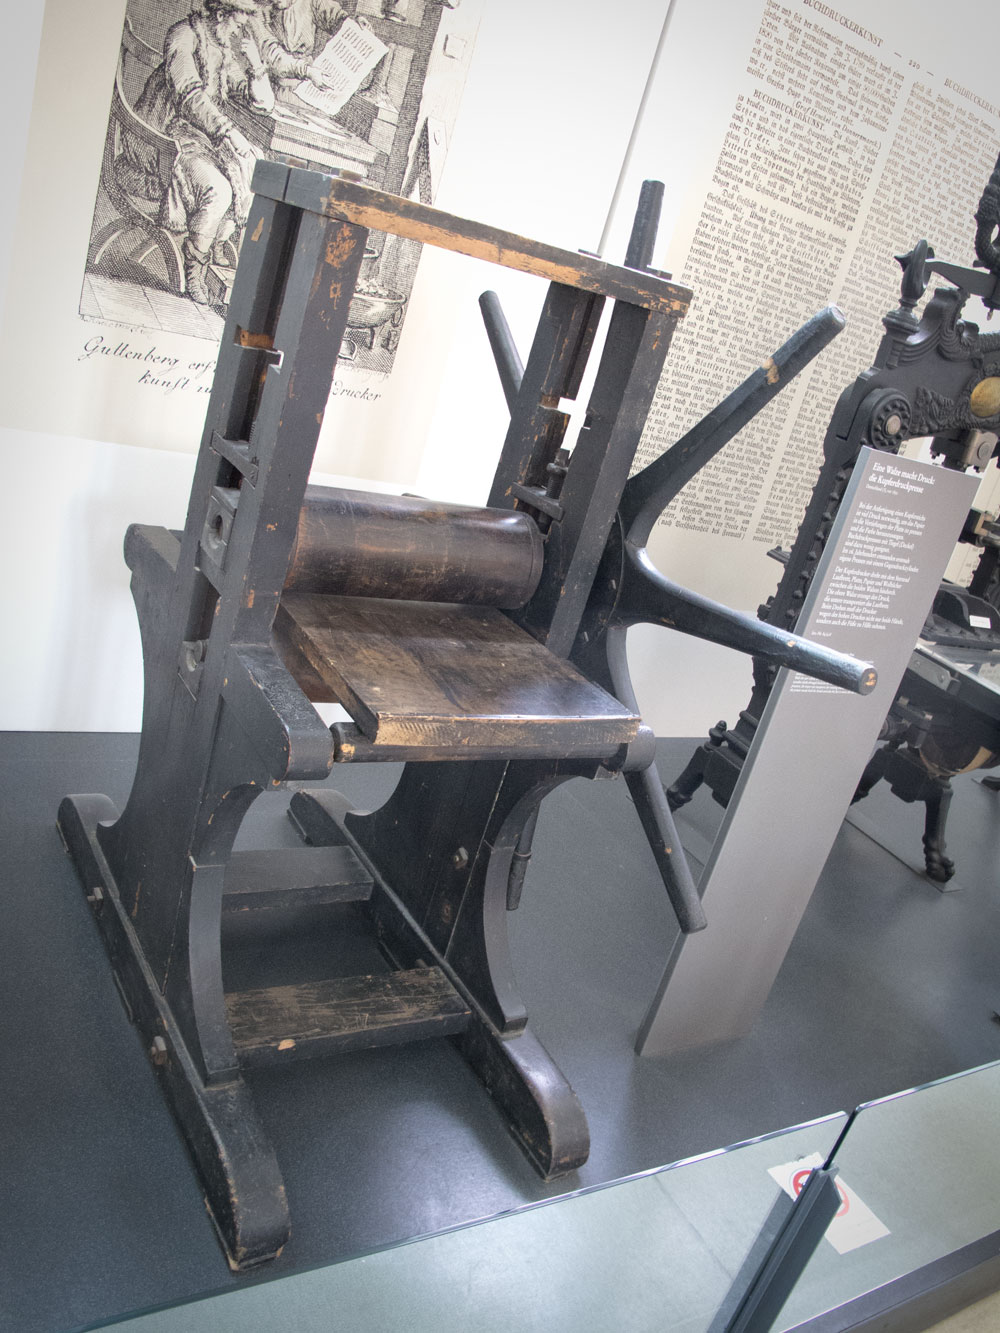 A 19th-century copperplate press on display at the Dutches Museum in Munich.